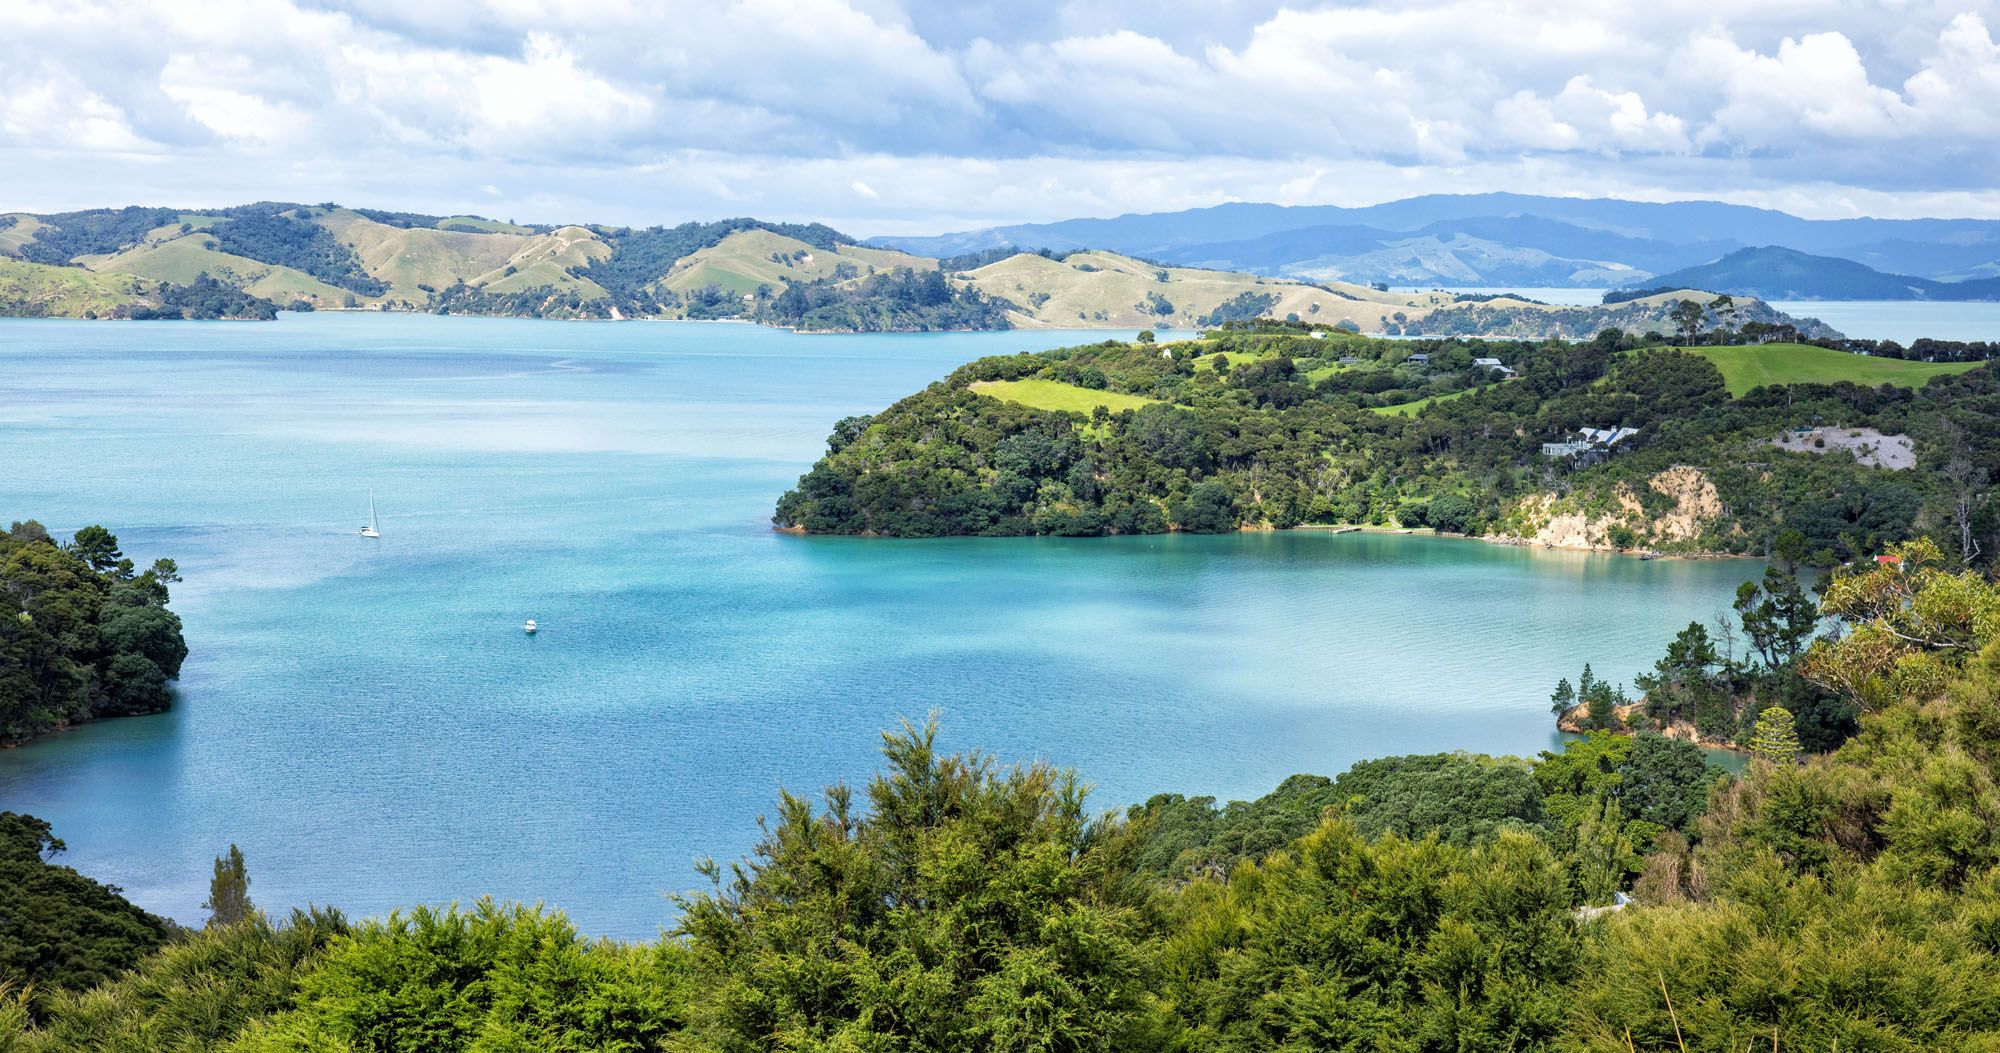 Featured image for “Waiheke Island Day Trip: Things to Do & One Day Itinerary”